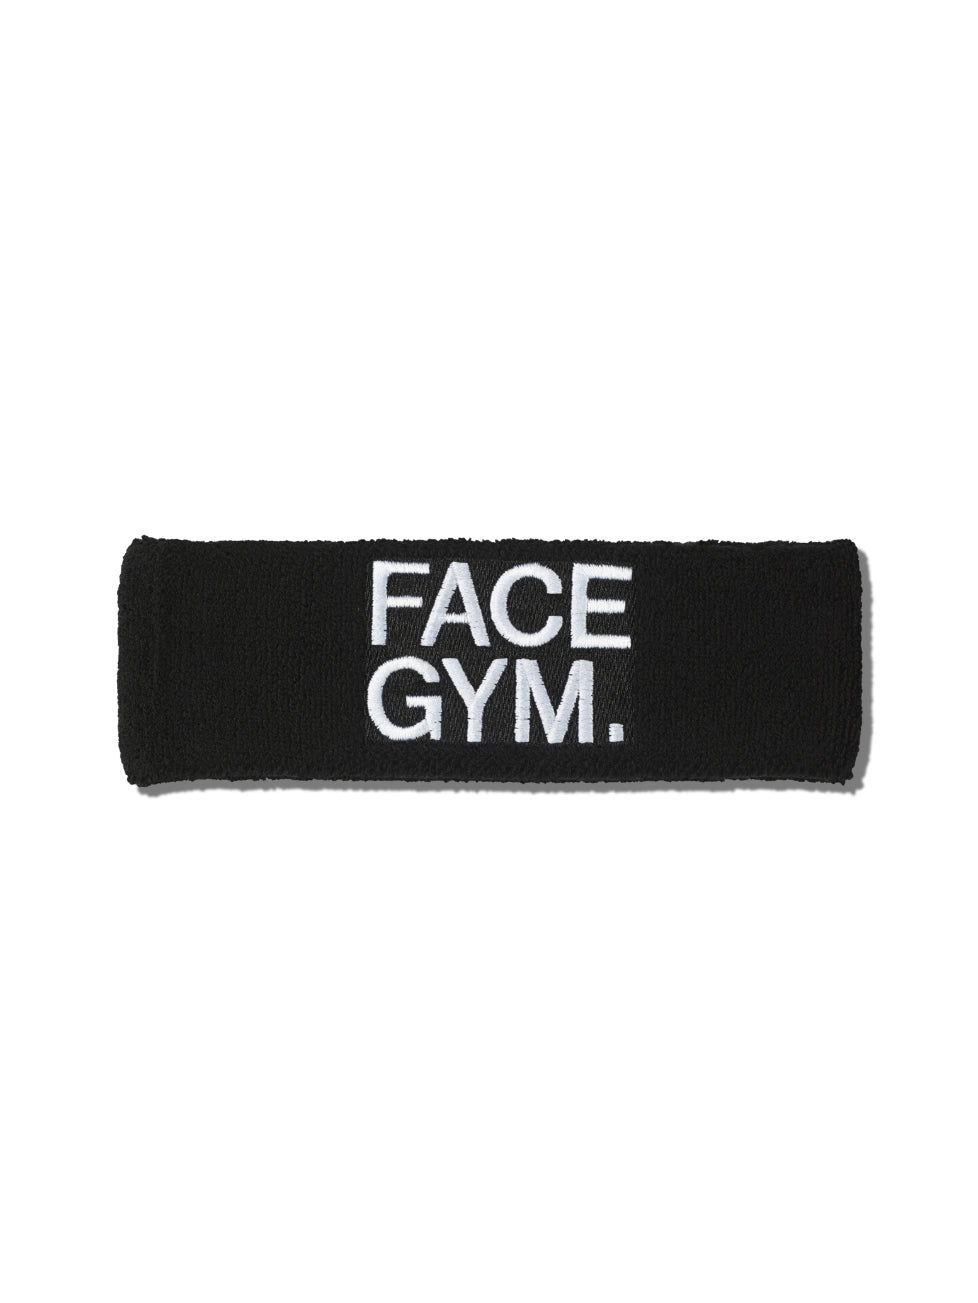 FACEGYM headband to hold back hair pack shot